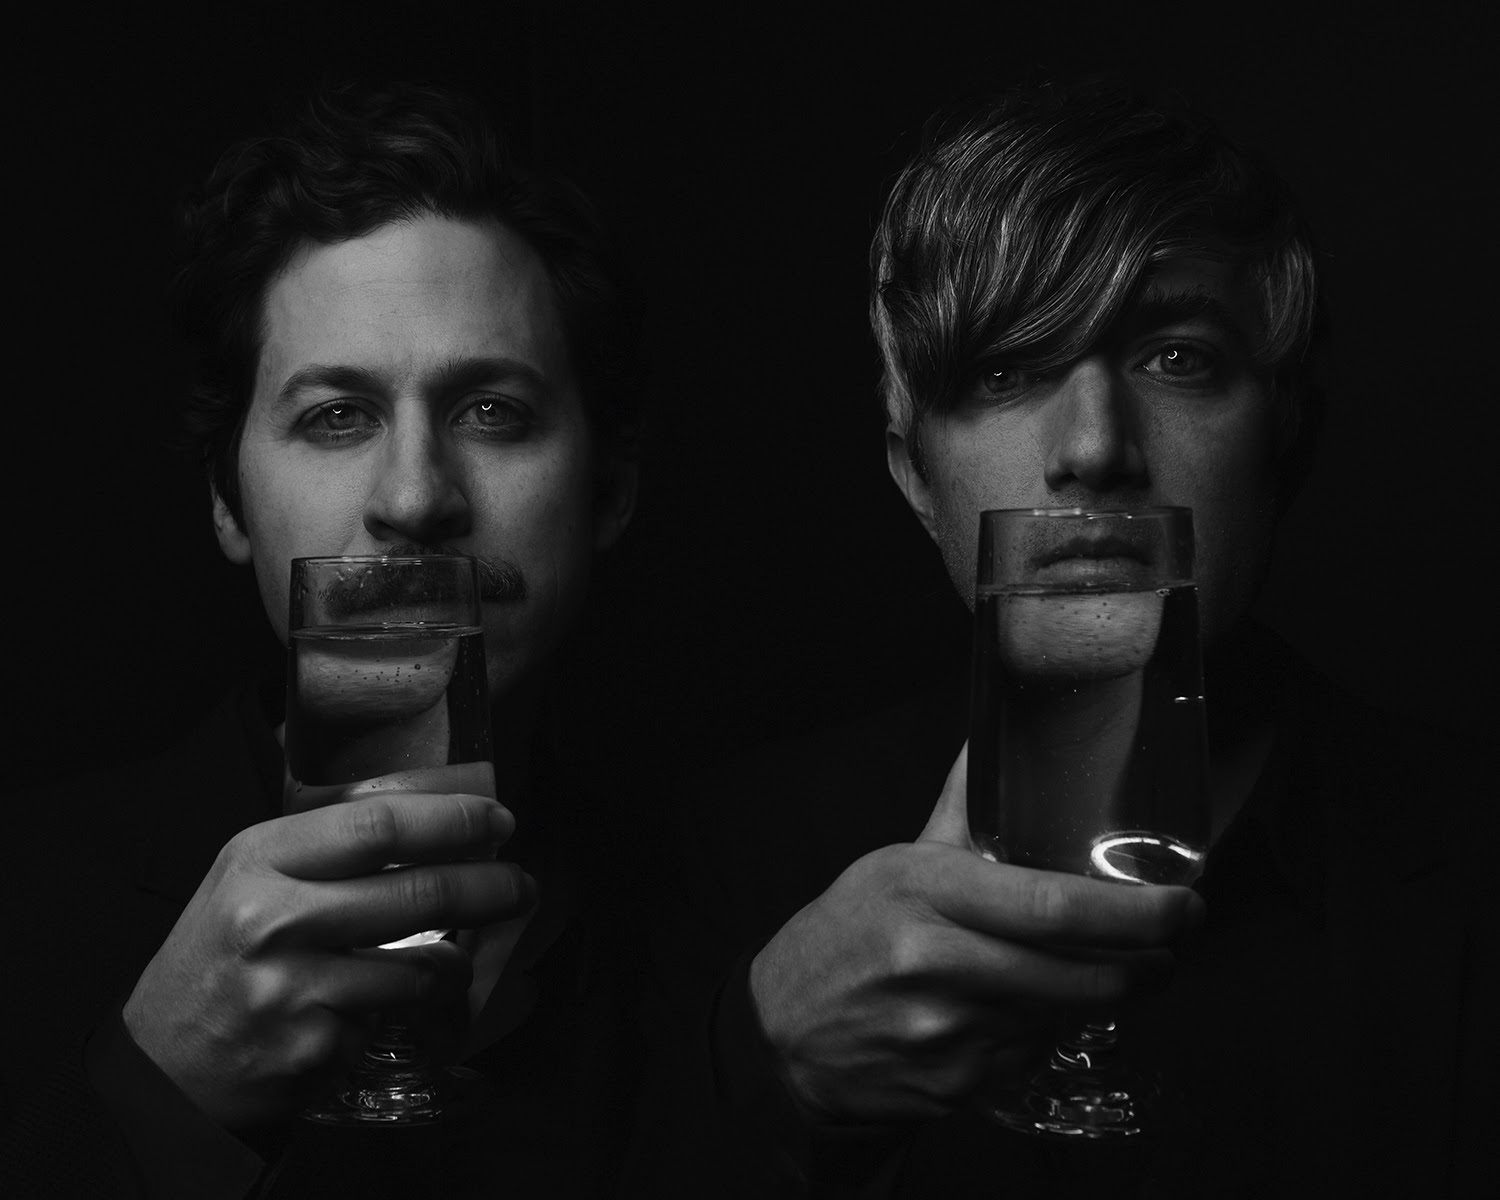 We Are Scientists + The Wytches + VANT + The Magic Gang Announced For Bushmills® Irish Whiskey Nationwide Bushmills Tour